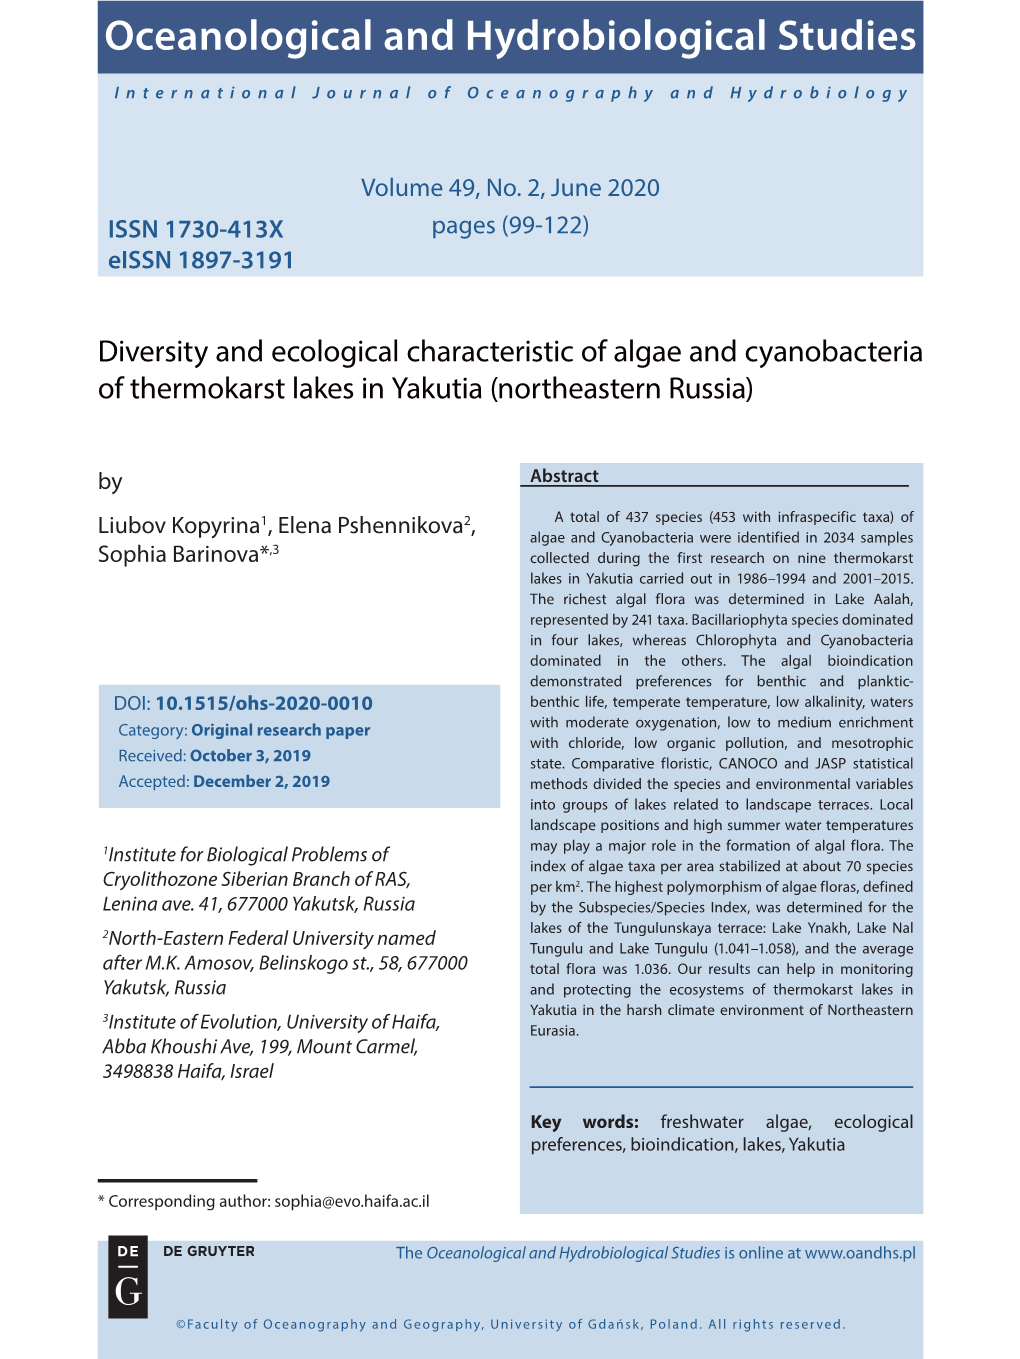 Diversity and Ecological Characteristic of Algae and Cyanobacteria of Thermokarst Lakes in Yakutia (Northeastern Russia) by Abstract